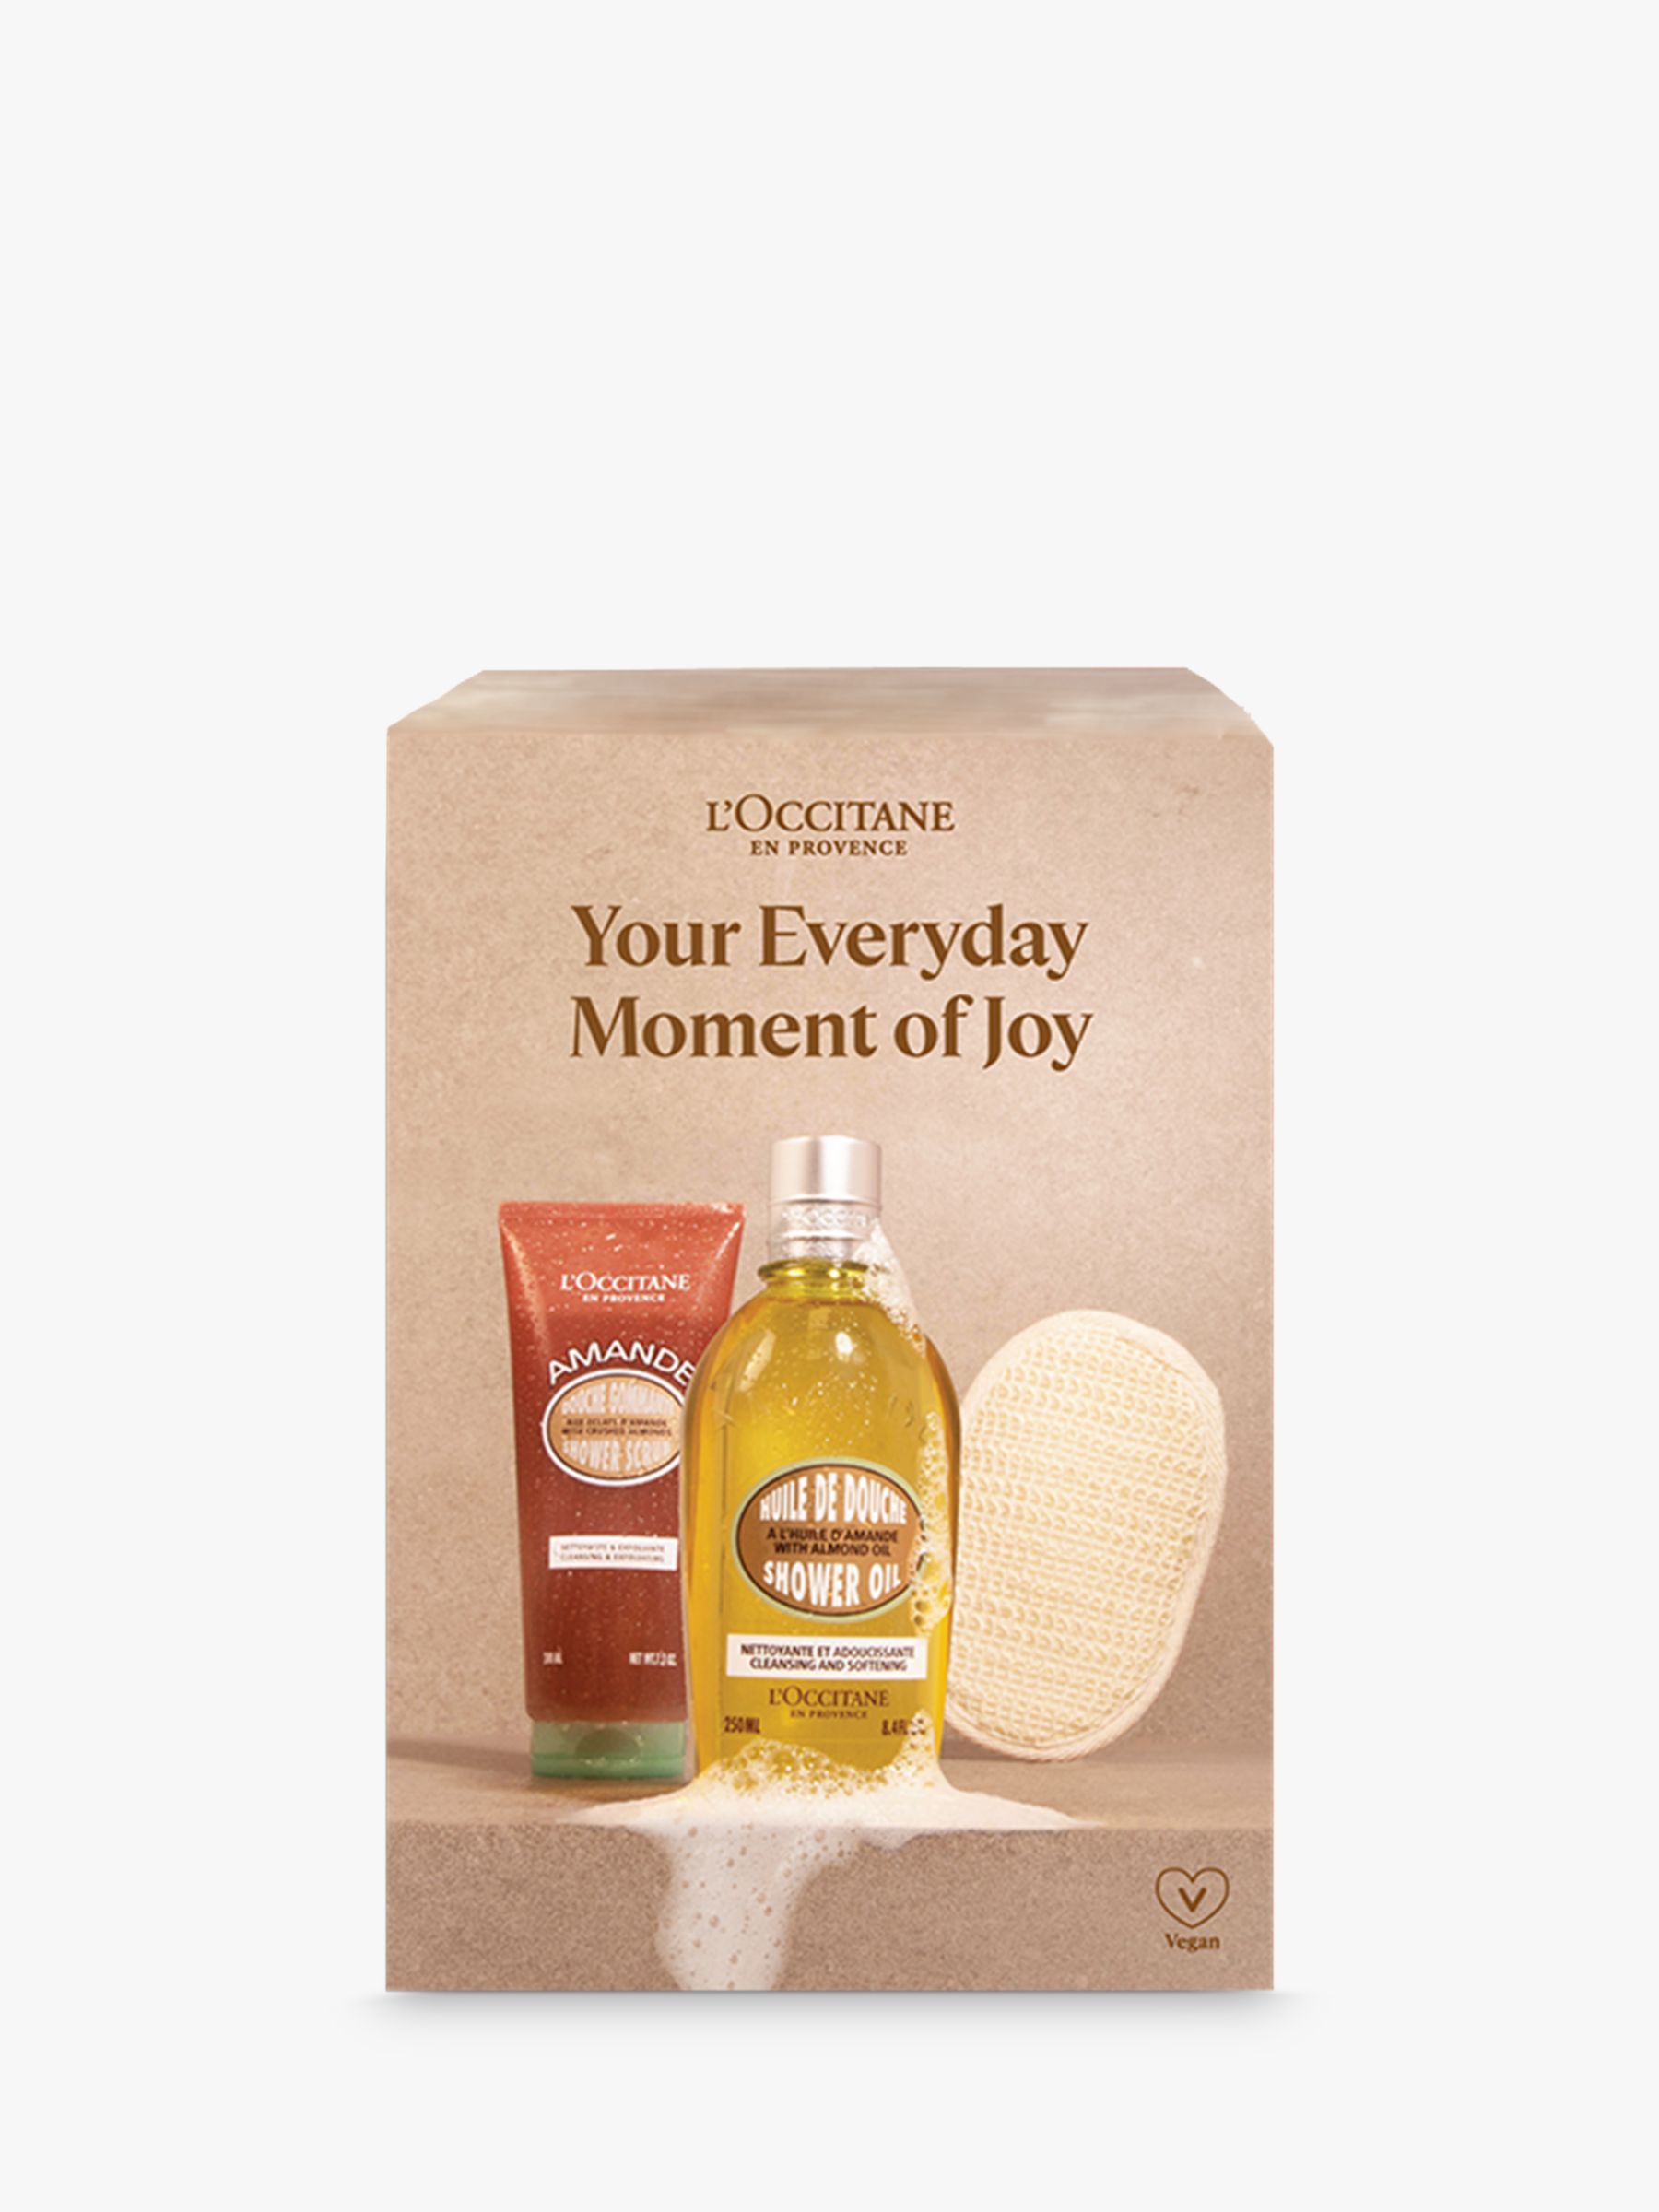 L'OCCITANE Your Every Day Moment of Joy Bodycare Gift Set 1